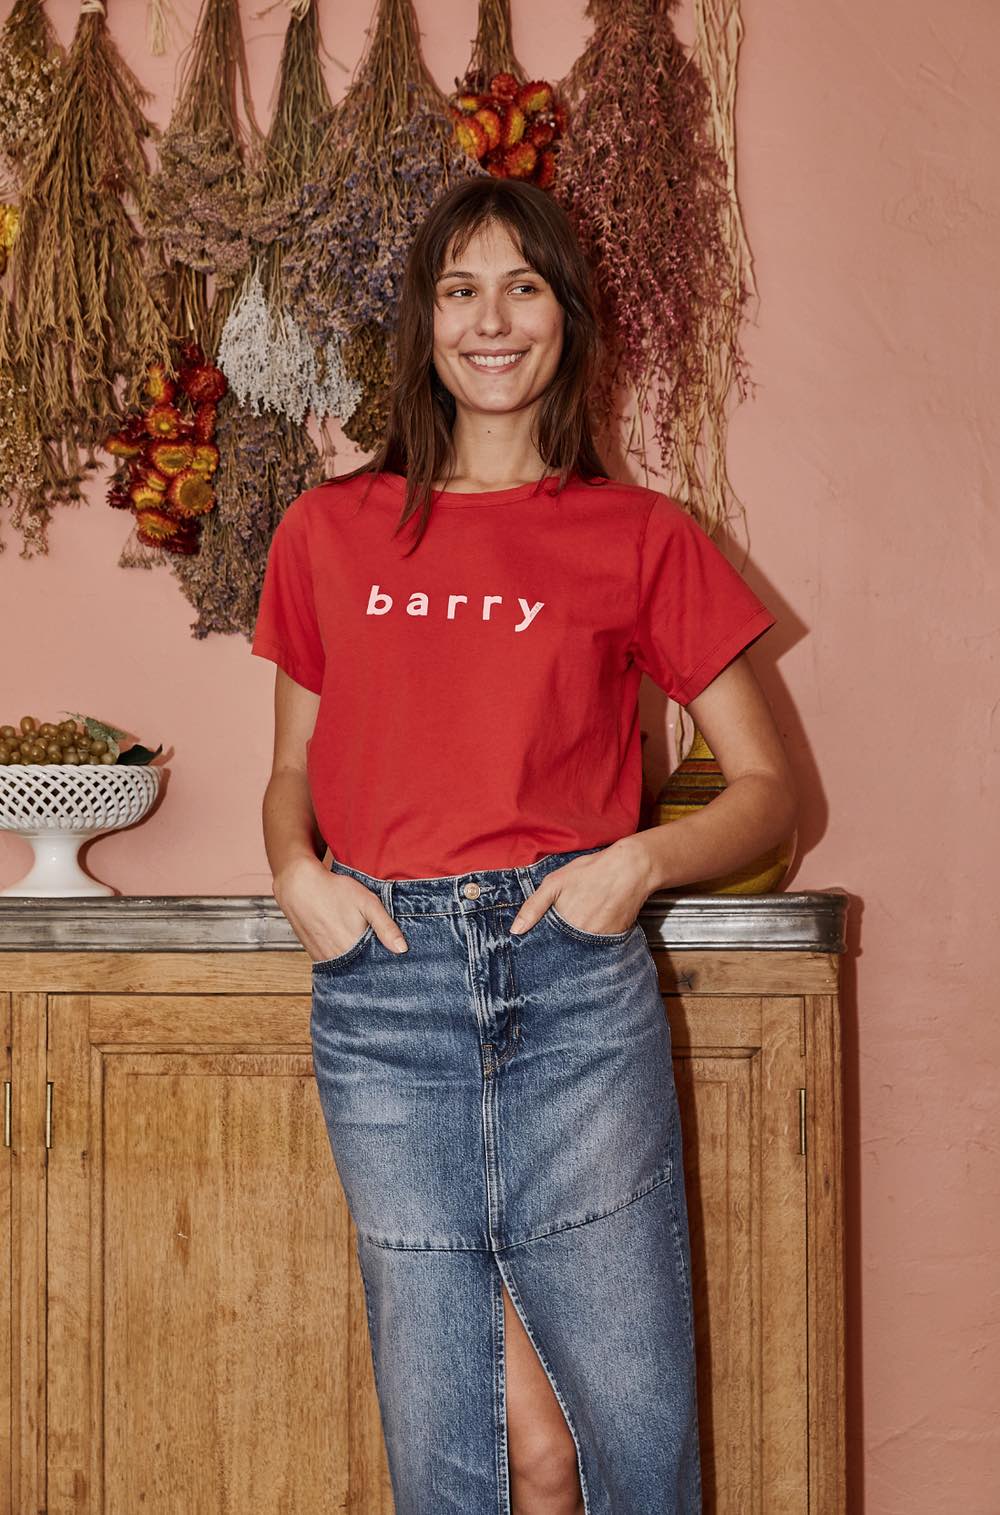 Barry Made Barry Tee - Red